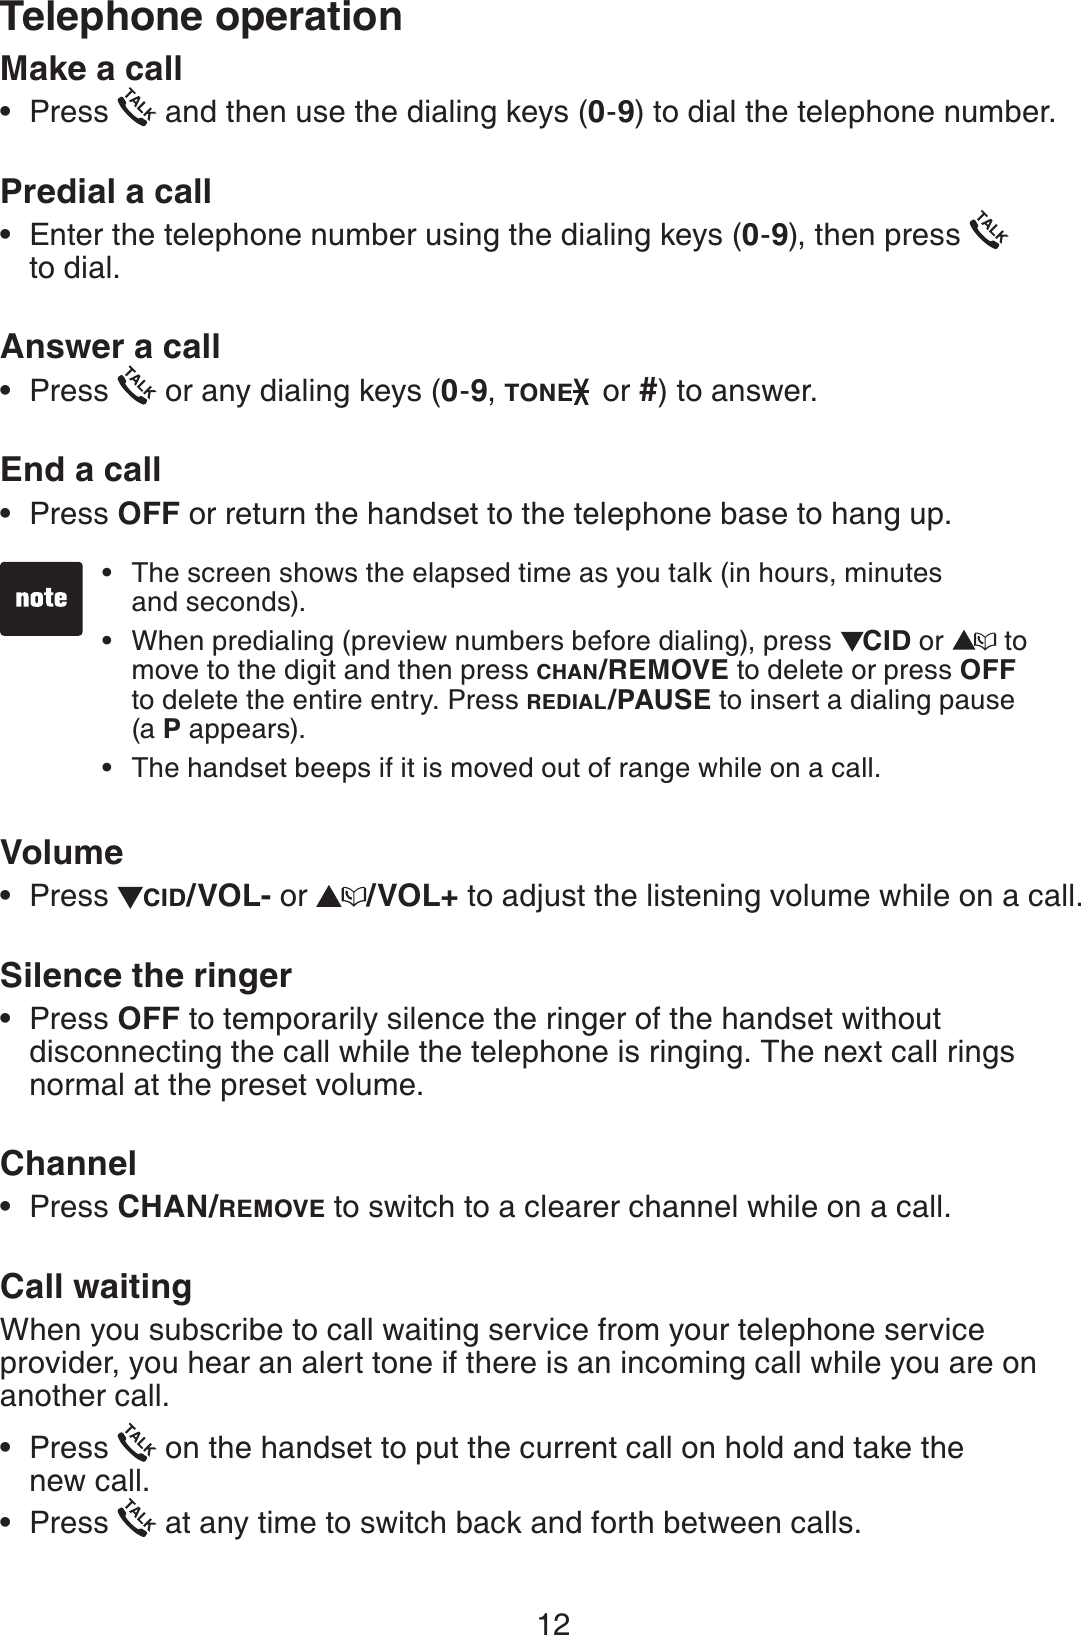 12Make a callPress   and then use the dialing keys (0-9) to dial the telephone number.Predial a call       Enter the telephone number using the dialing keys (0-9), then press    to dial.Answer a callPress   or any dialing keys (0-9, TONE  or #) to answer.End a call  Press OFF or return the handset to the telephone base to hang up.VolumePress  CID/VOL- or  /VOL+ to adjust the listening volume while on a call.Silence the ringerPress OFF to temporarily silence the ringer of the handset without disconnecting the call while the telephone is ringing. The next call rings normal at the preset volume.ChannelPress CHAN/REMOVE to switch to a clearer channel while on a call.Call waitingWhen you subscribe to call waiting service from your telephone service provider, you hear an alert tone if there is an incoming call while you are on another call. Press   on the handset to put the current call on hold and take the    new call.Press   at any time to switch back and forth between calls.•••••••••The screen shows the elapsed time as you talk (in hours, minutes    and seconds).When predialing (preview numbers before dialing), press  CID or   to move to the digit and then press CHAN/REMOVE to delete or press OFF  to delete the entire entry. Press REDIAL/PAUSE to insert a dialing pause  (a P appears).The handset beeps if it is moved out of range while on a call.•••Telephone operation